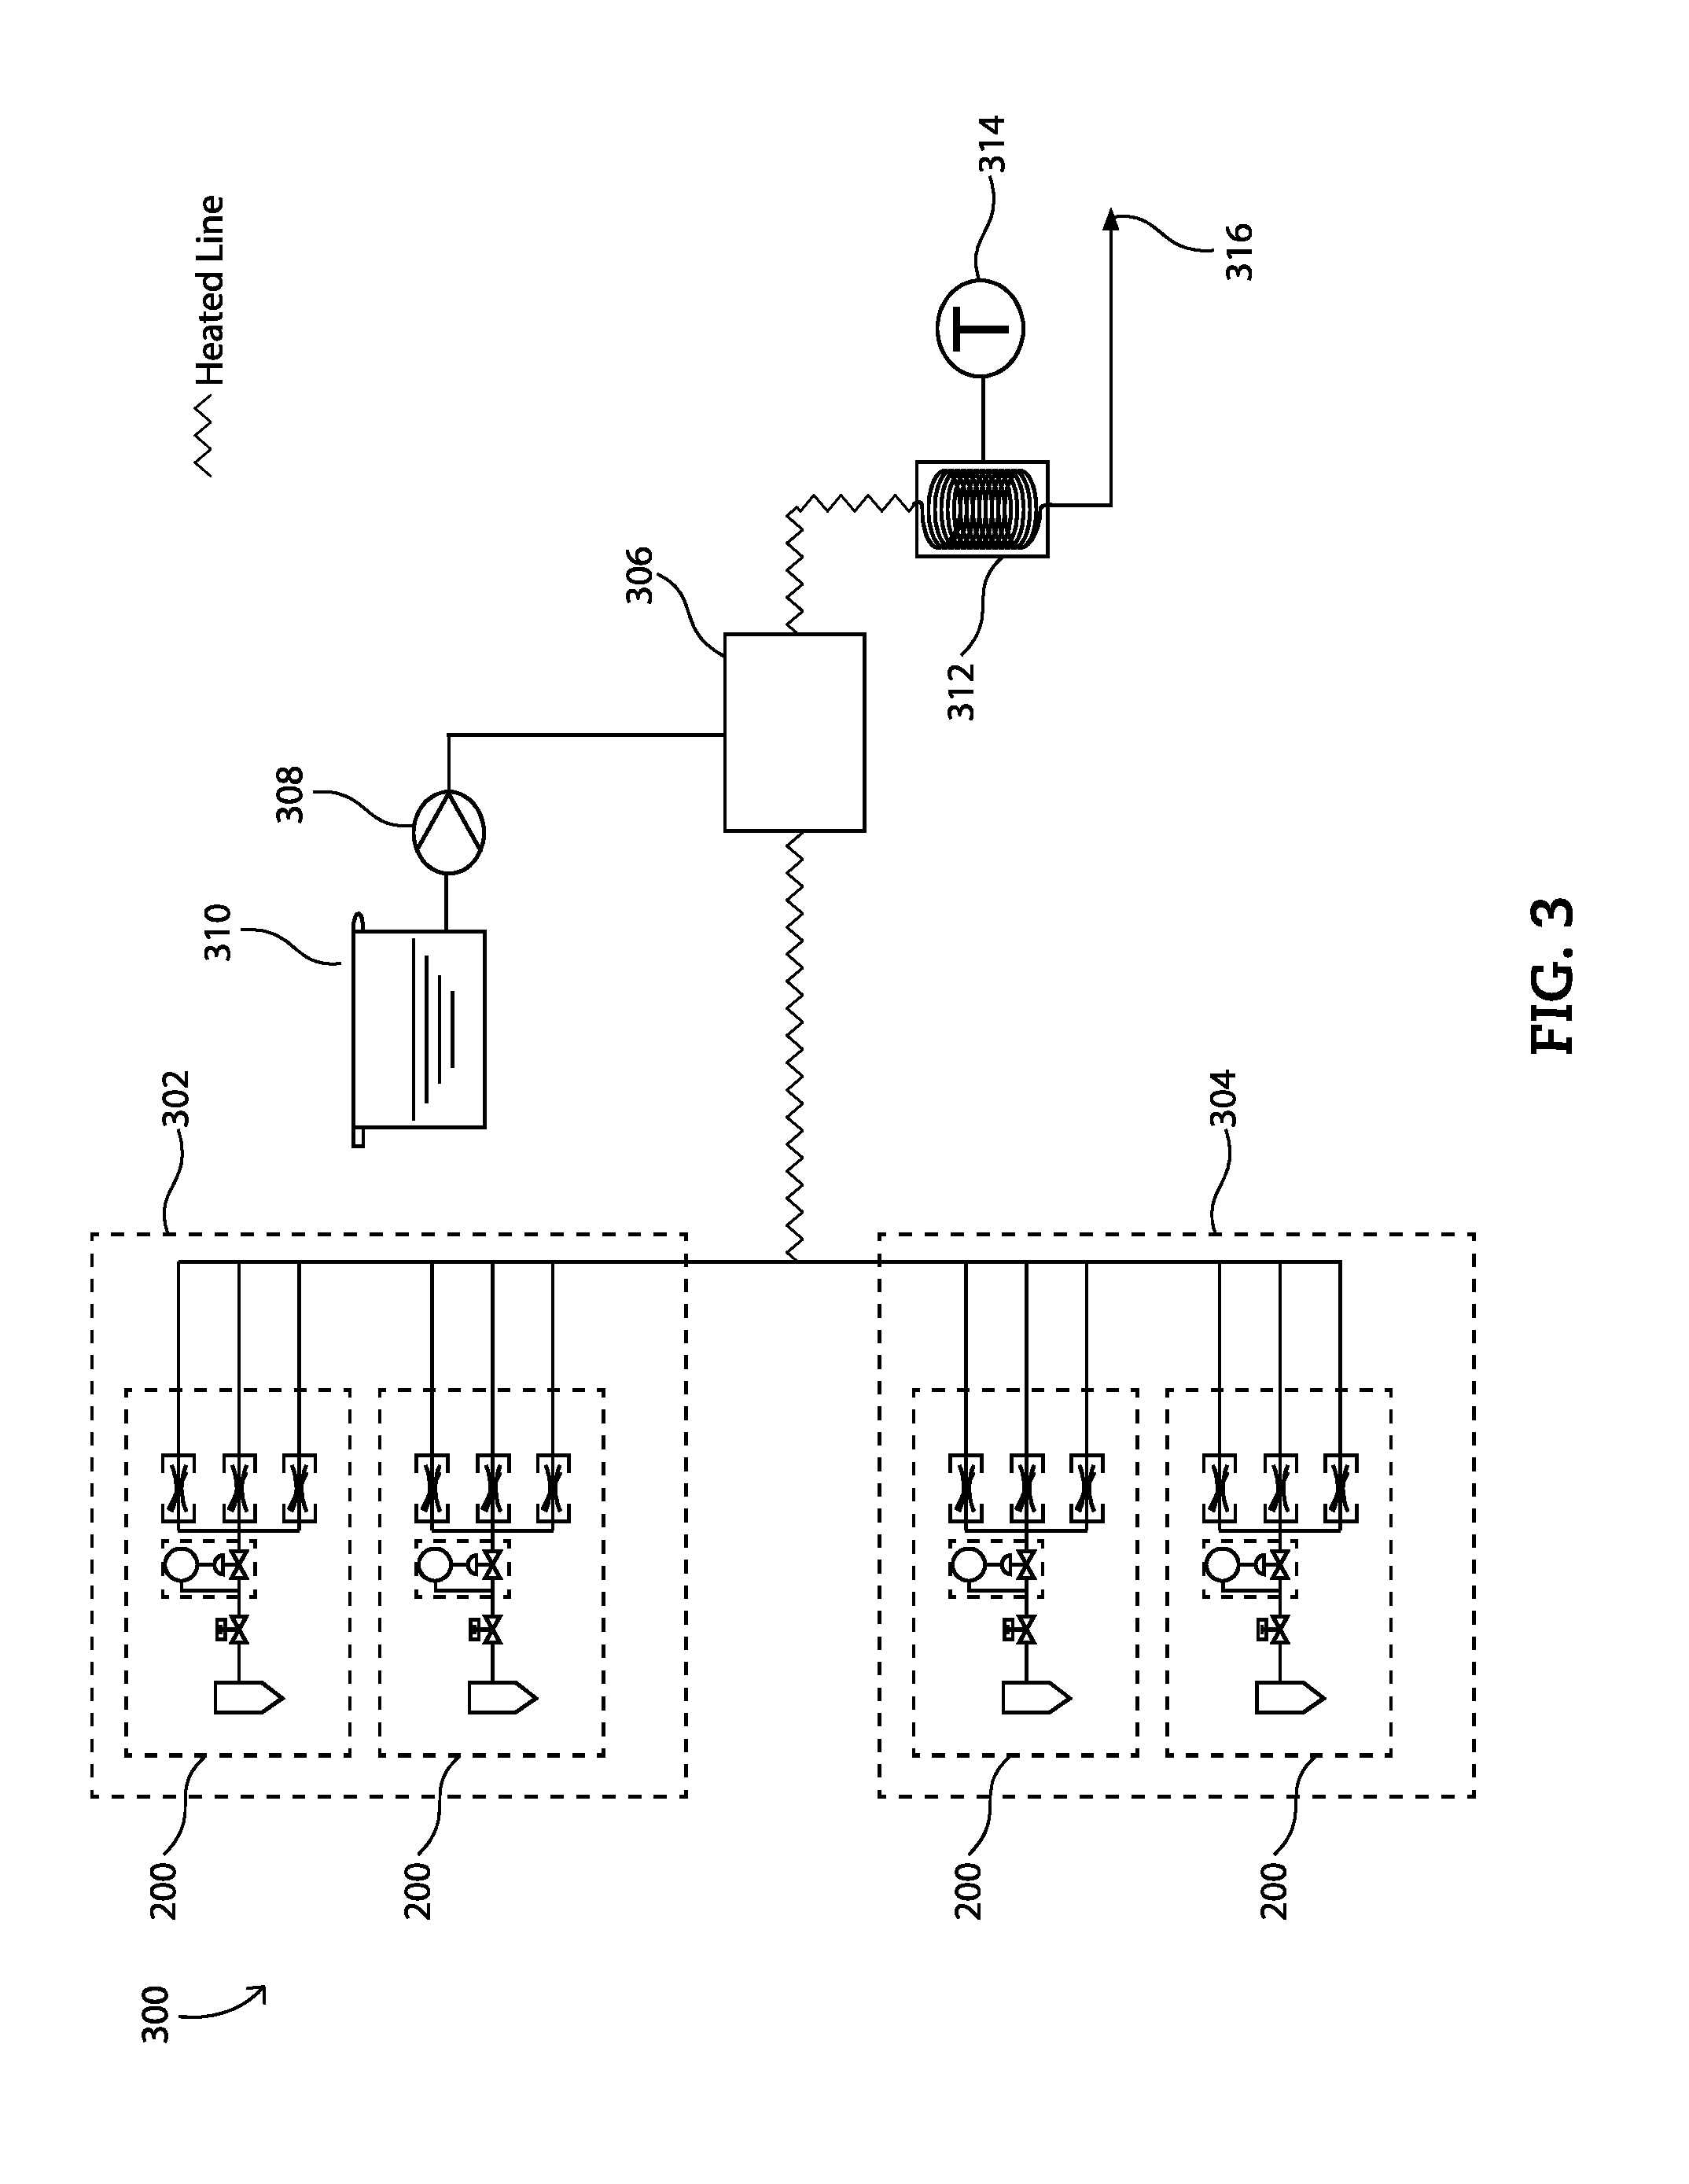 System and Apparatus for a Laboratory Scale Reactor